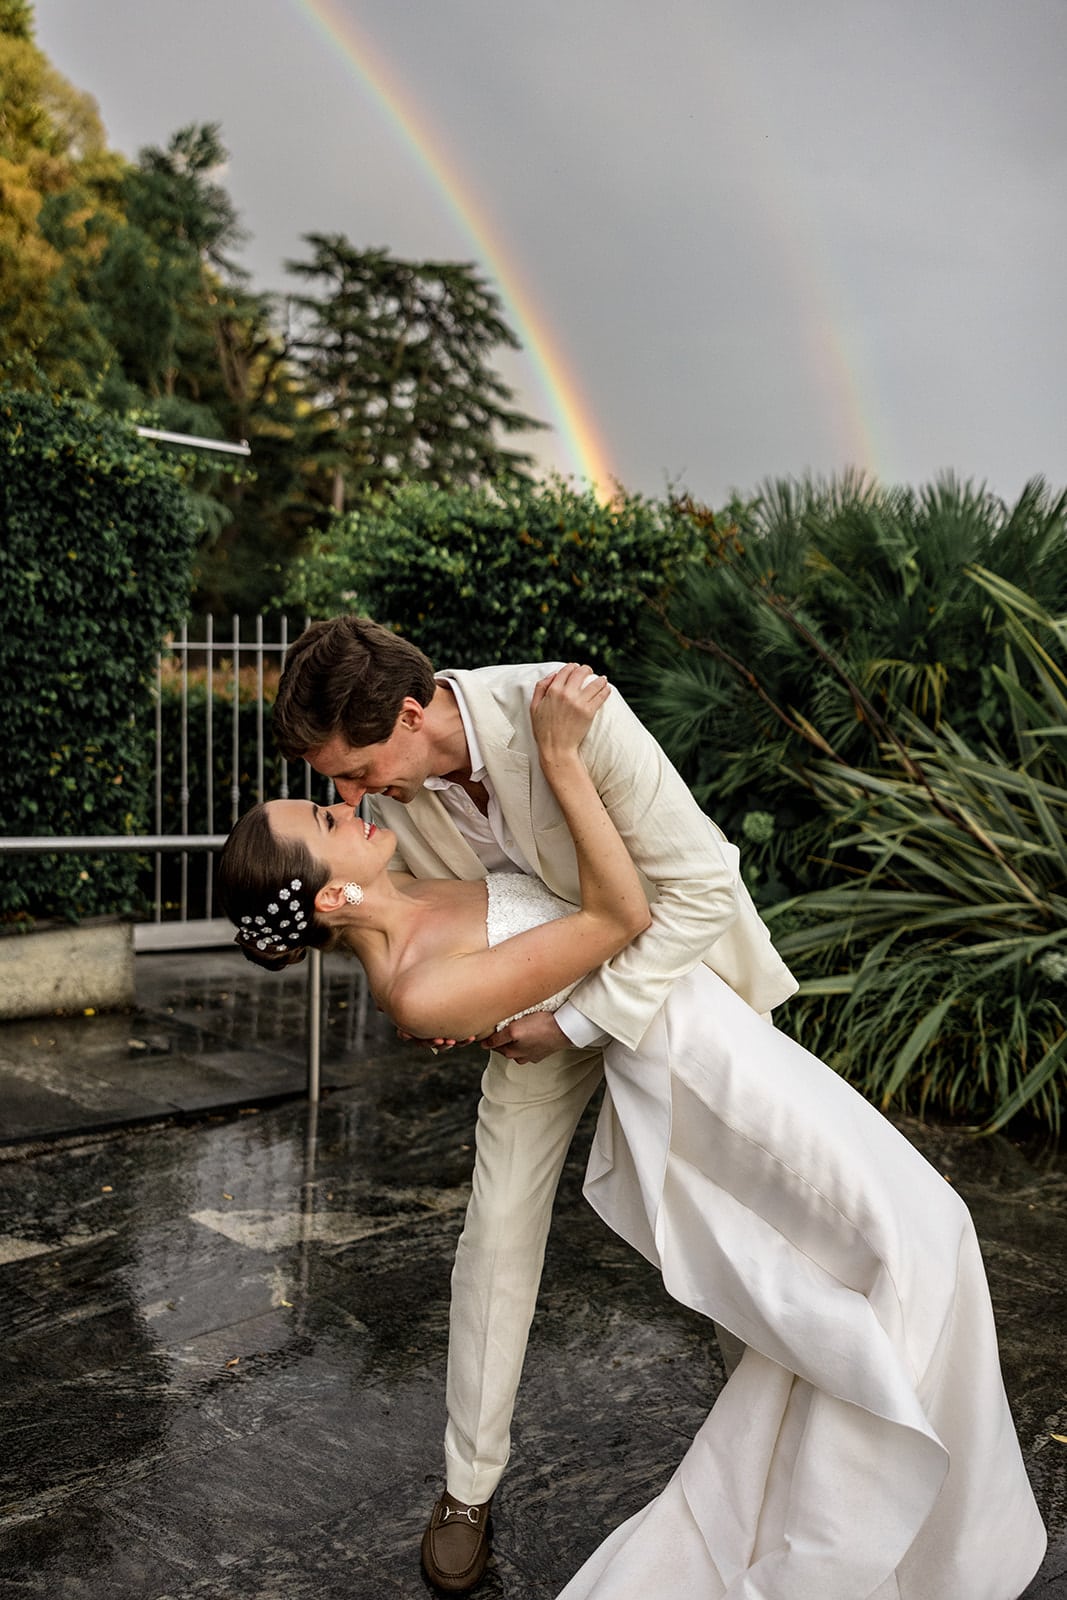 Groom dips bride with a bright rainbow in the background